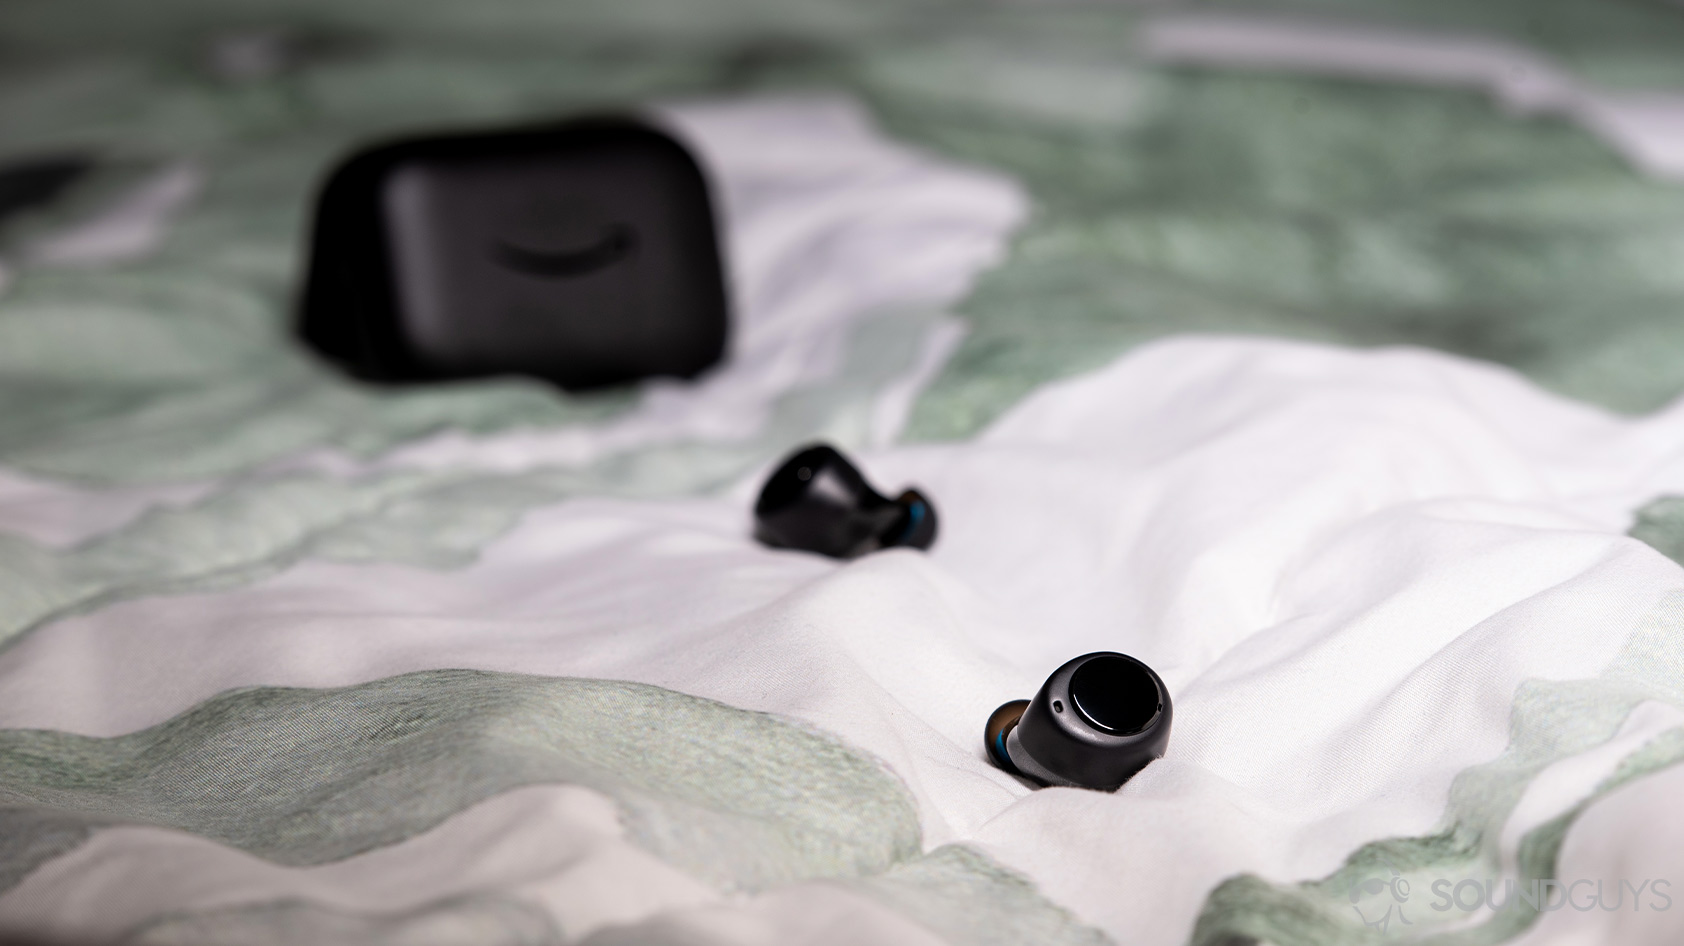 A picture of the Amazon Echo Buds true wireless earbuds outside of the charging case.